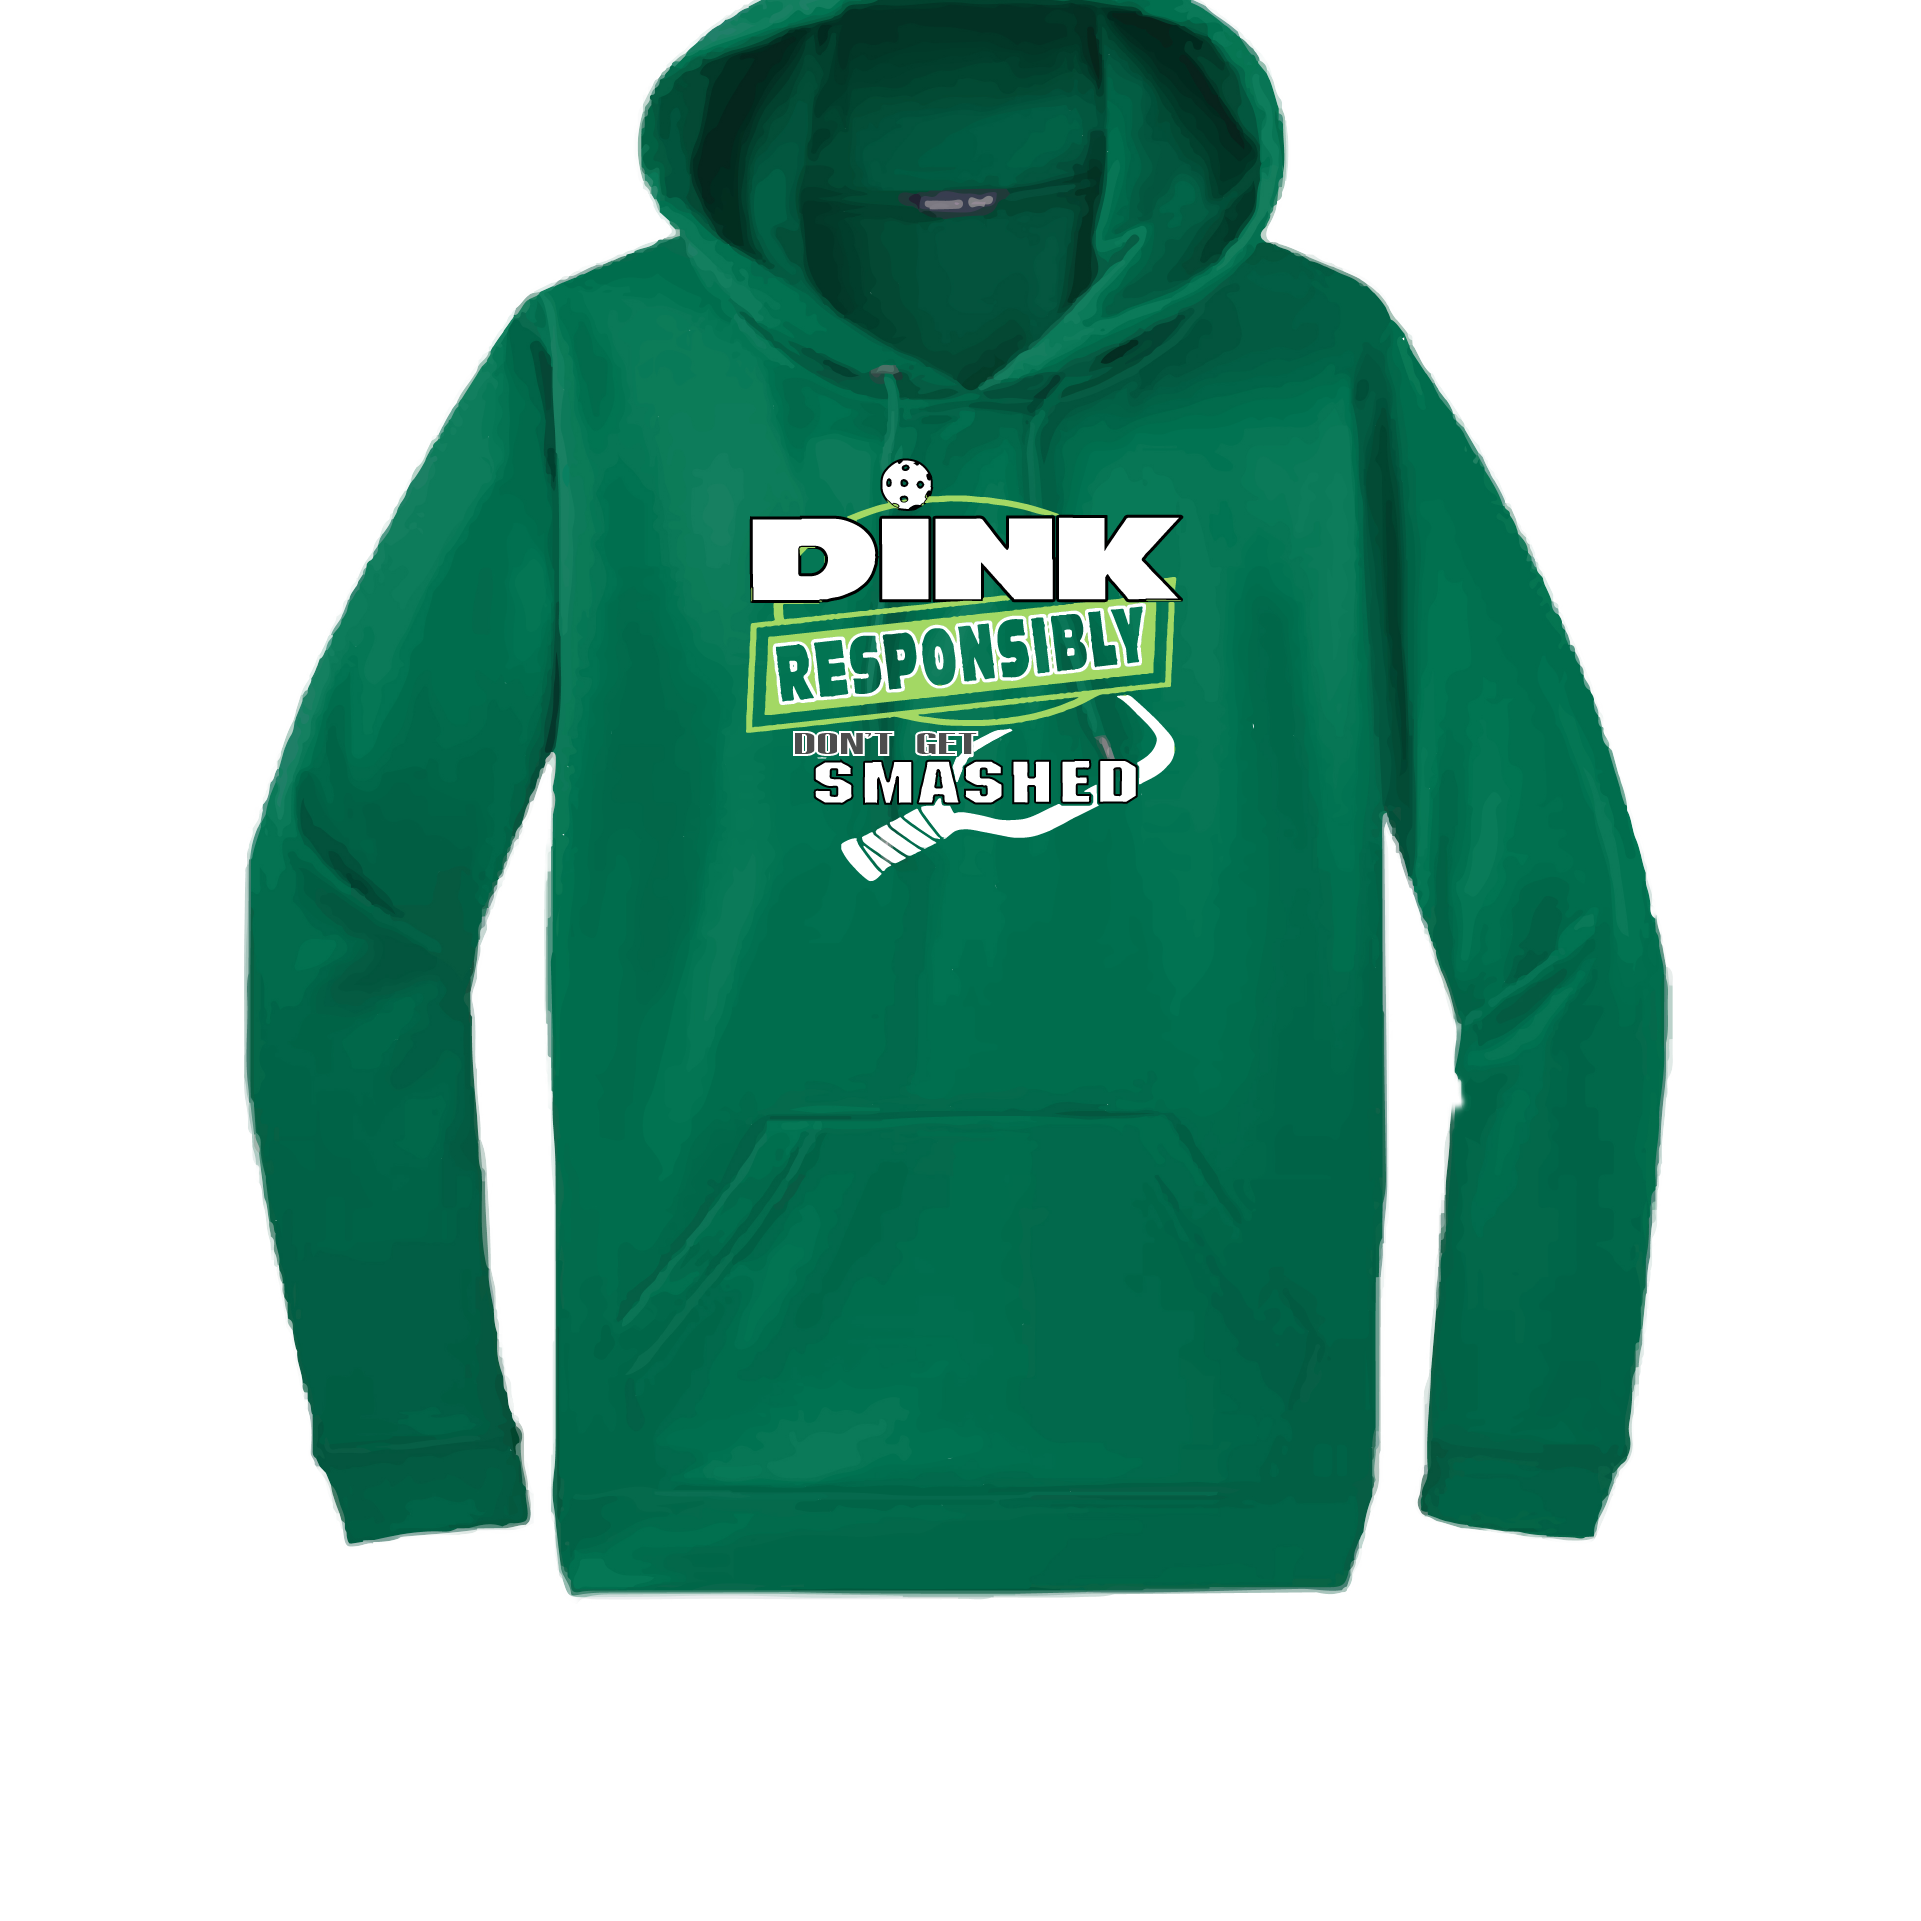 Pickleball Design:  Dink Responsibly – Don’t get Smashed  Unisex Hooded Sweatshirt: Moisture-wicking, double-lined hood, front pouch pocket.  This unisex hooded sweatshirt is ultra comfortable and soft. Stay warm on the Pickleball courts while being that hit with this one of kind design.